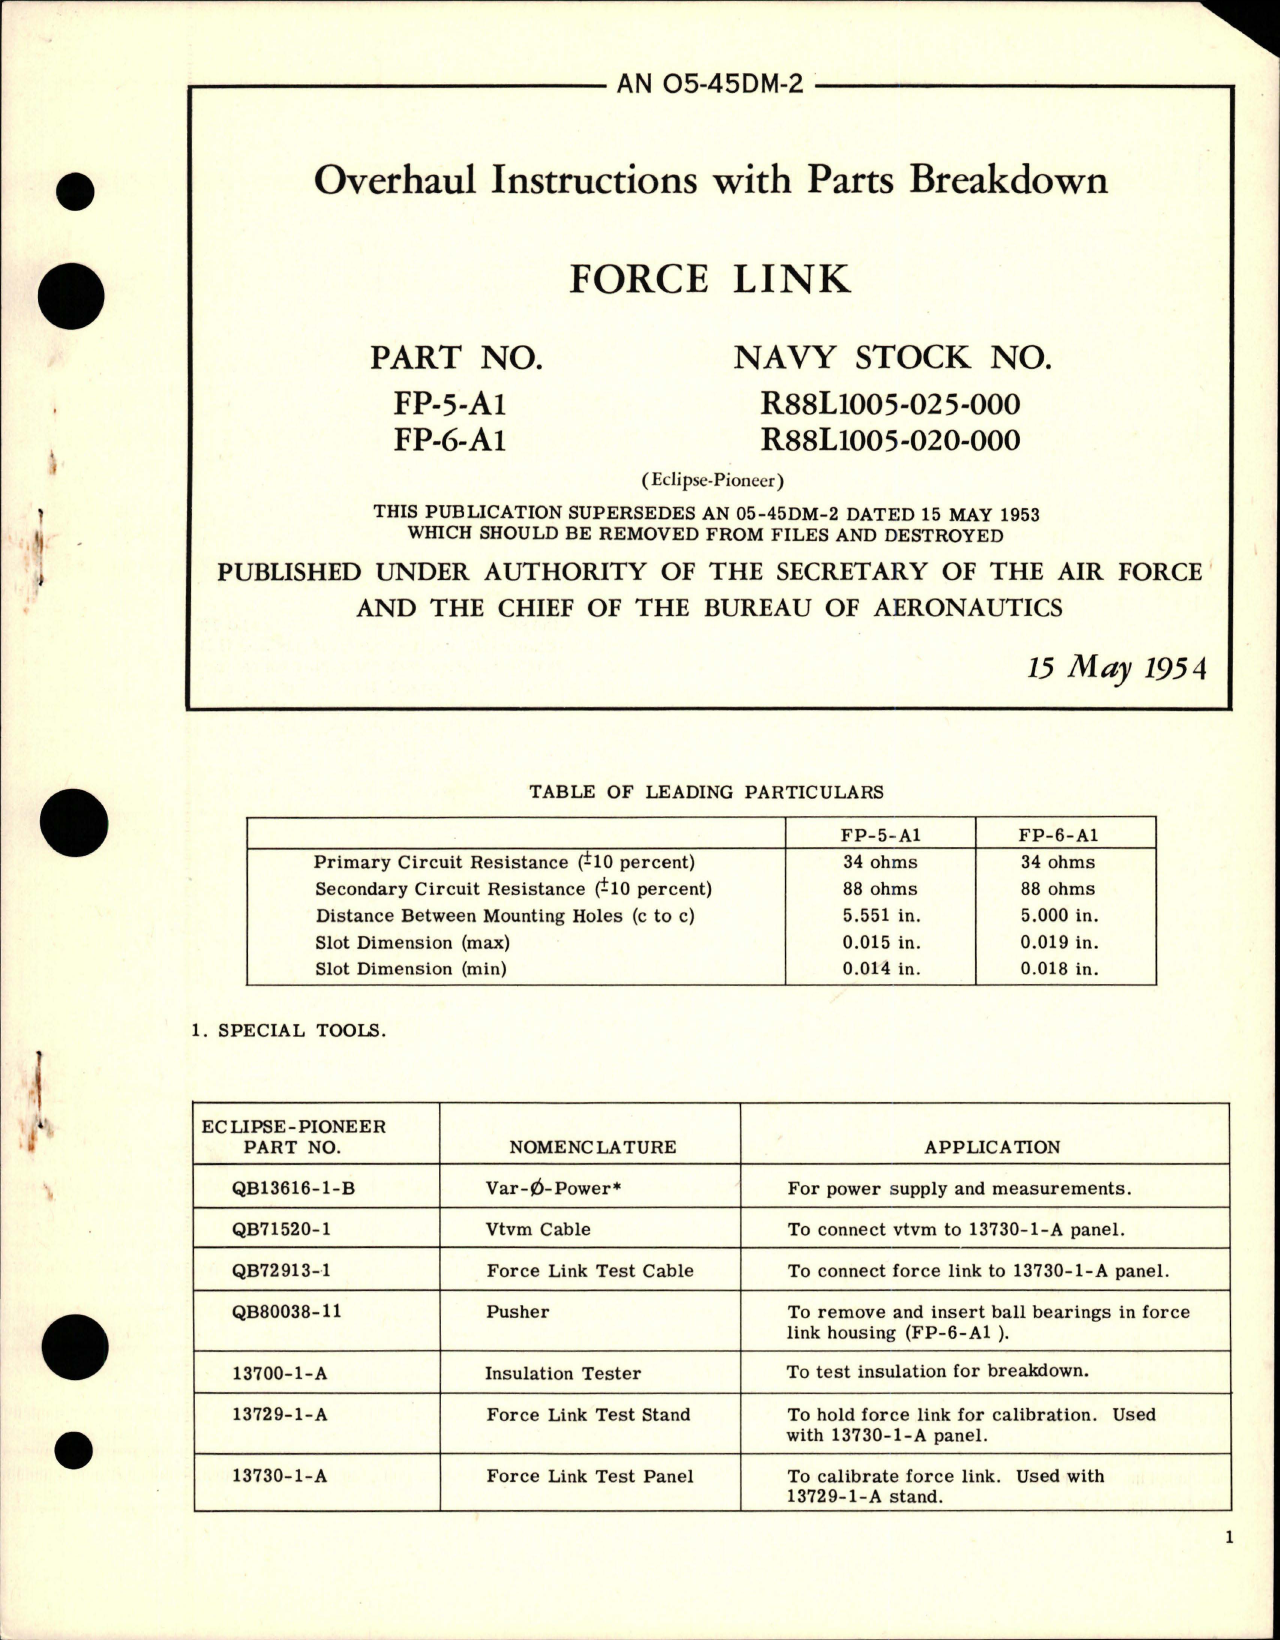 Sample page 1 from AirCorps Library document: Overhaul Instructions with Parts for Force Link - Part FP-5-A1, FP-6-A1